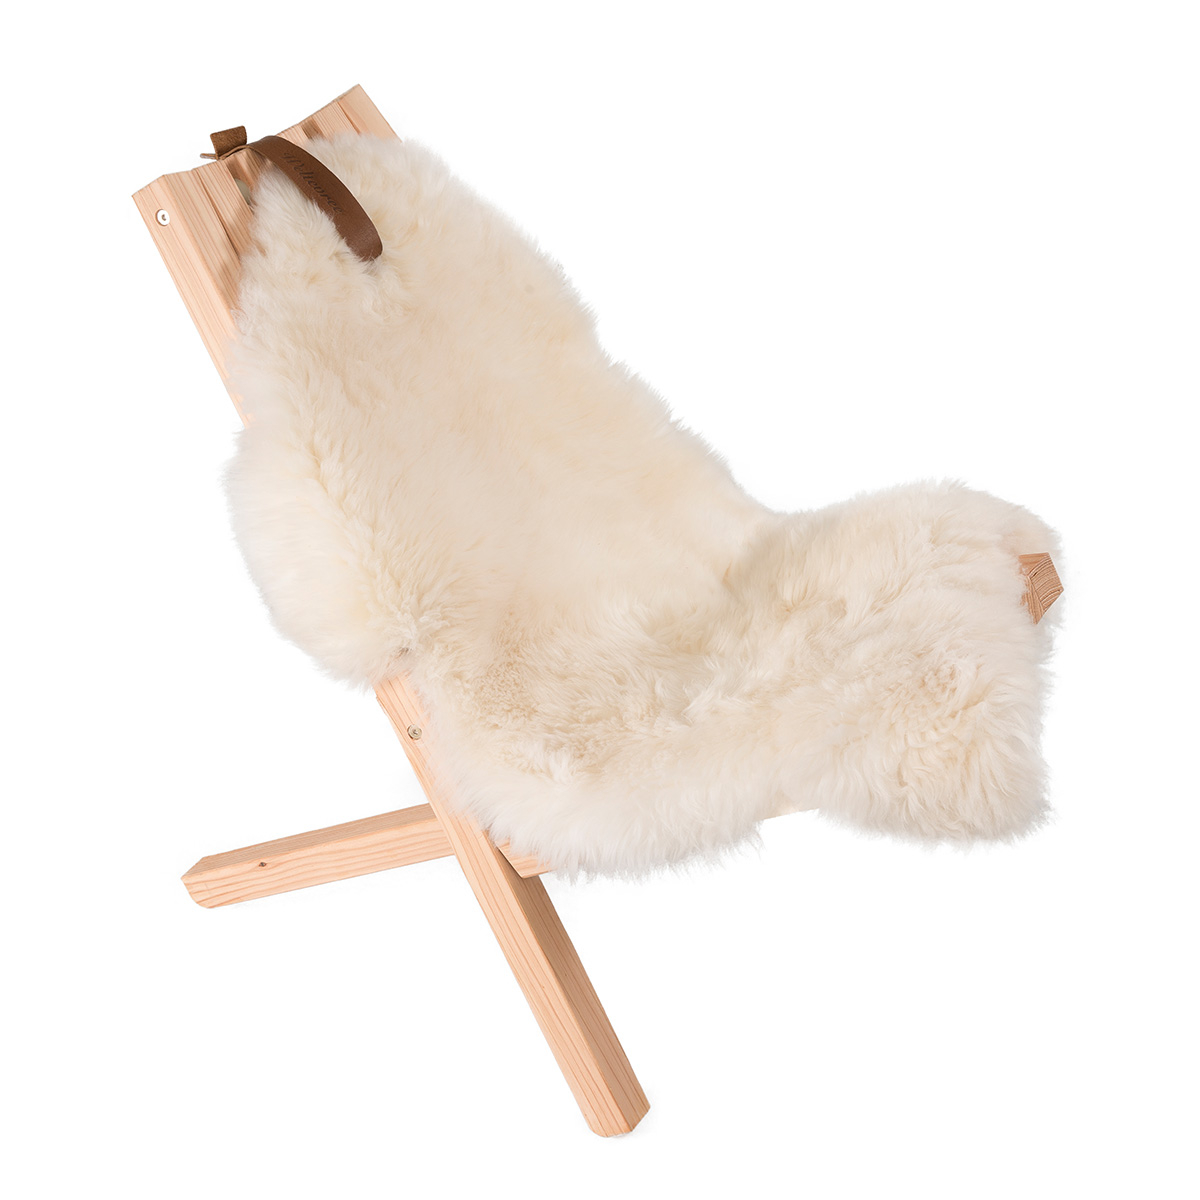 Weltevree Sheepscoat White, leather loop for attaching to the Fieldchair or roll it up to form a soft cushion